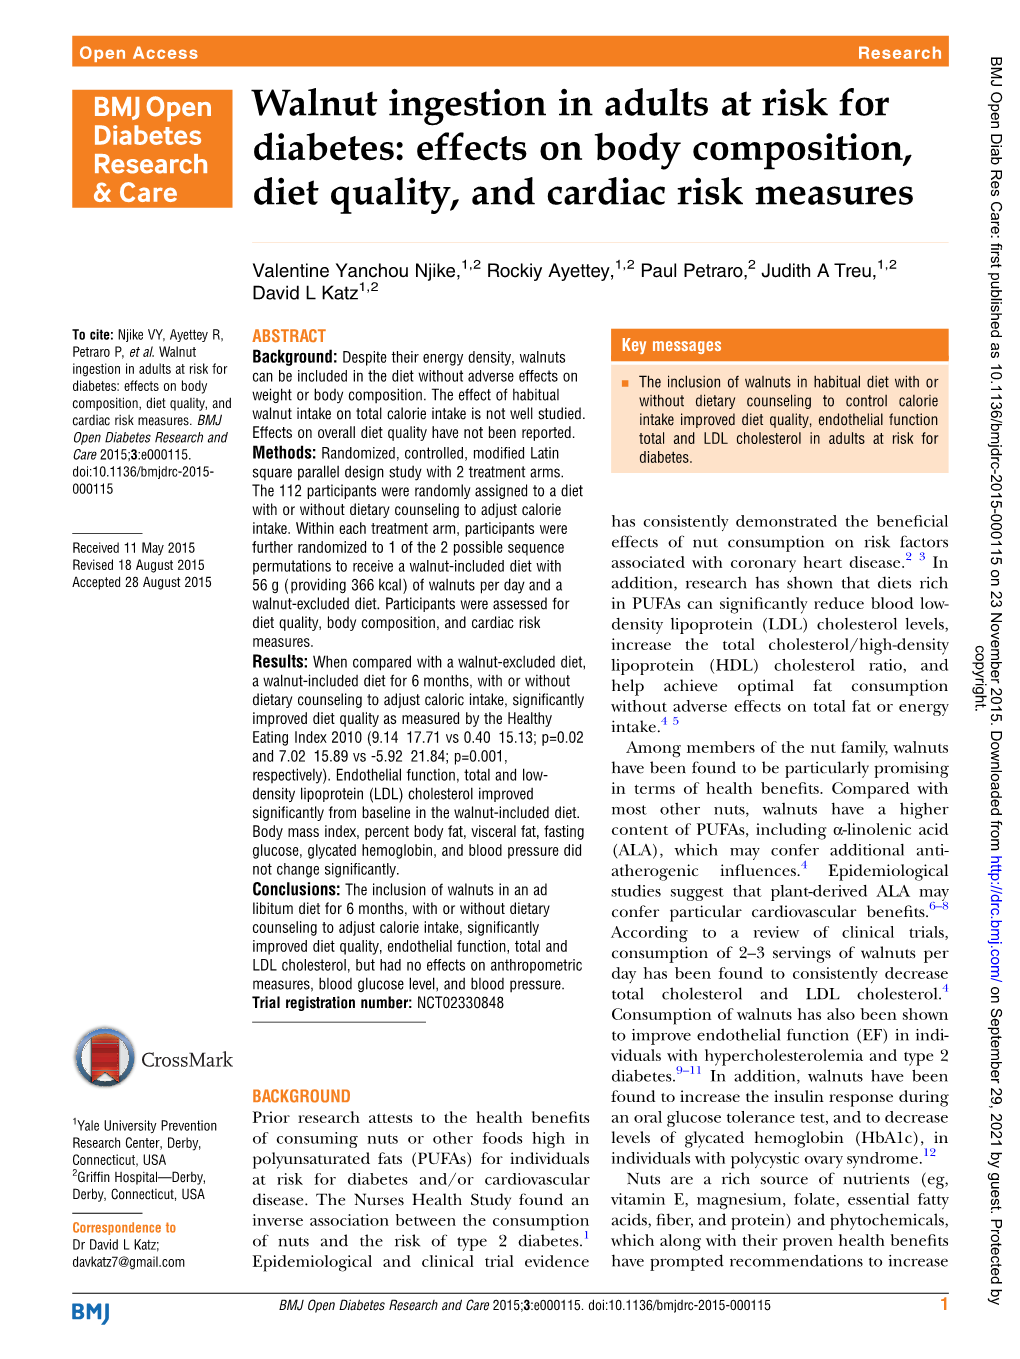 Effects on Body Composition, Diet Quality, and Cardiac Risk Measures